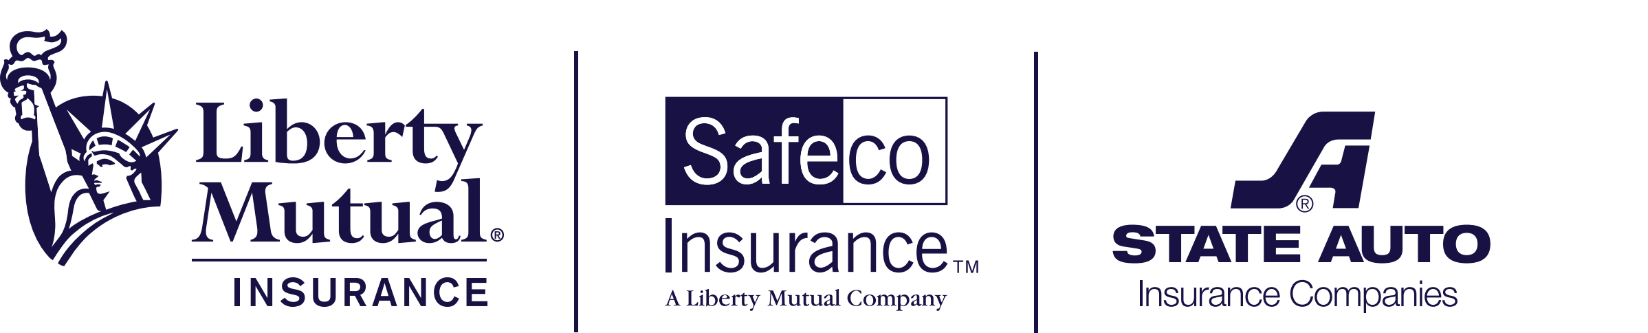 16. Liberty Mutual and Safeco Insurance (Presenting)